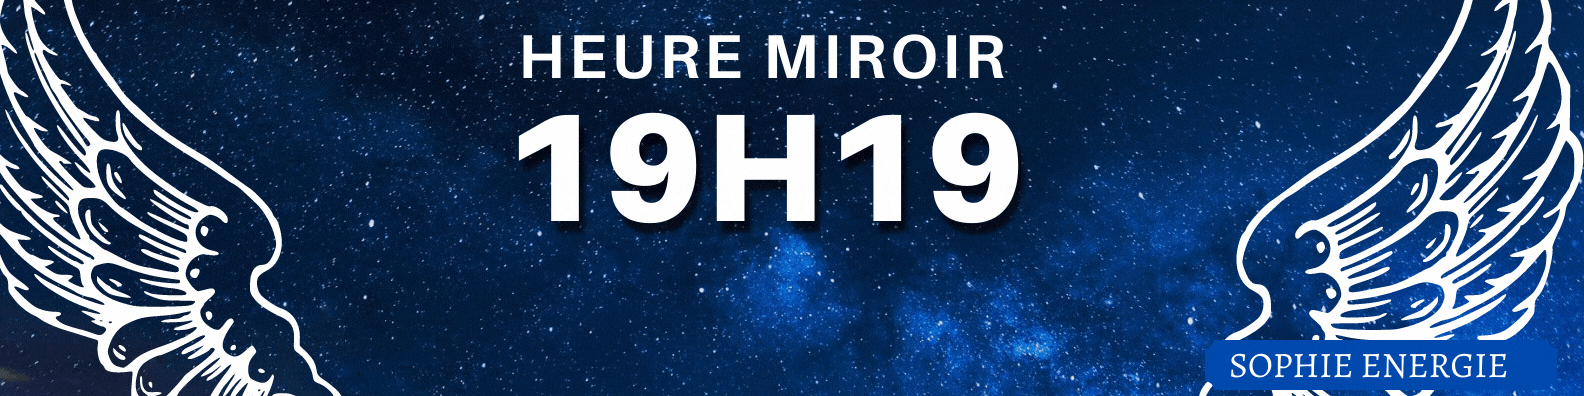 HEURE MIROIR anges 19h19